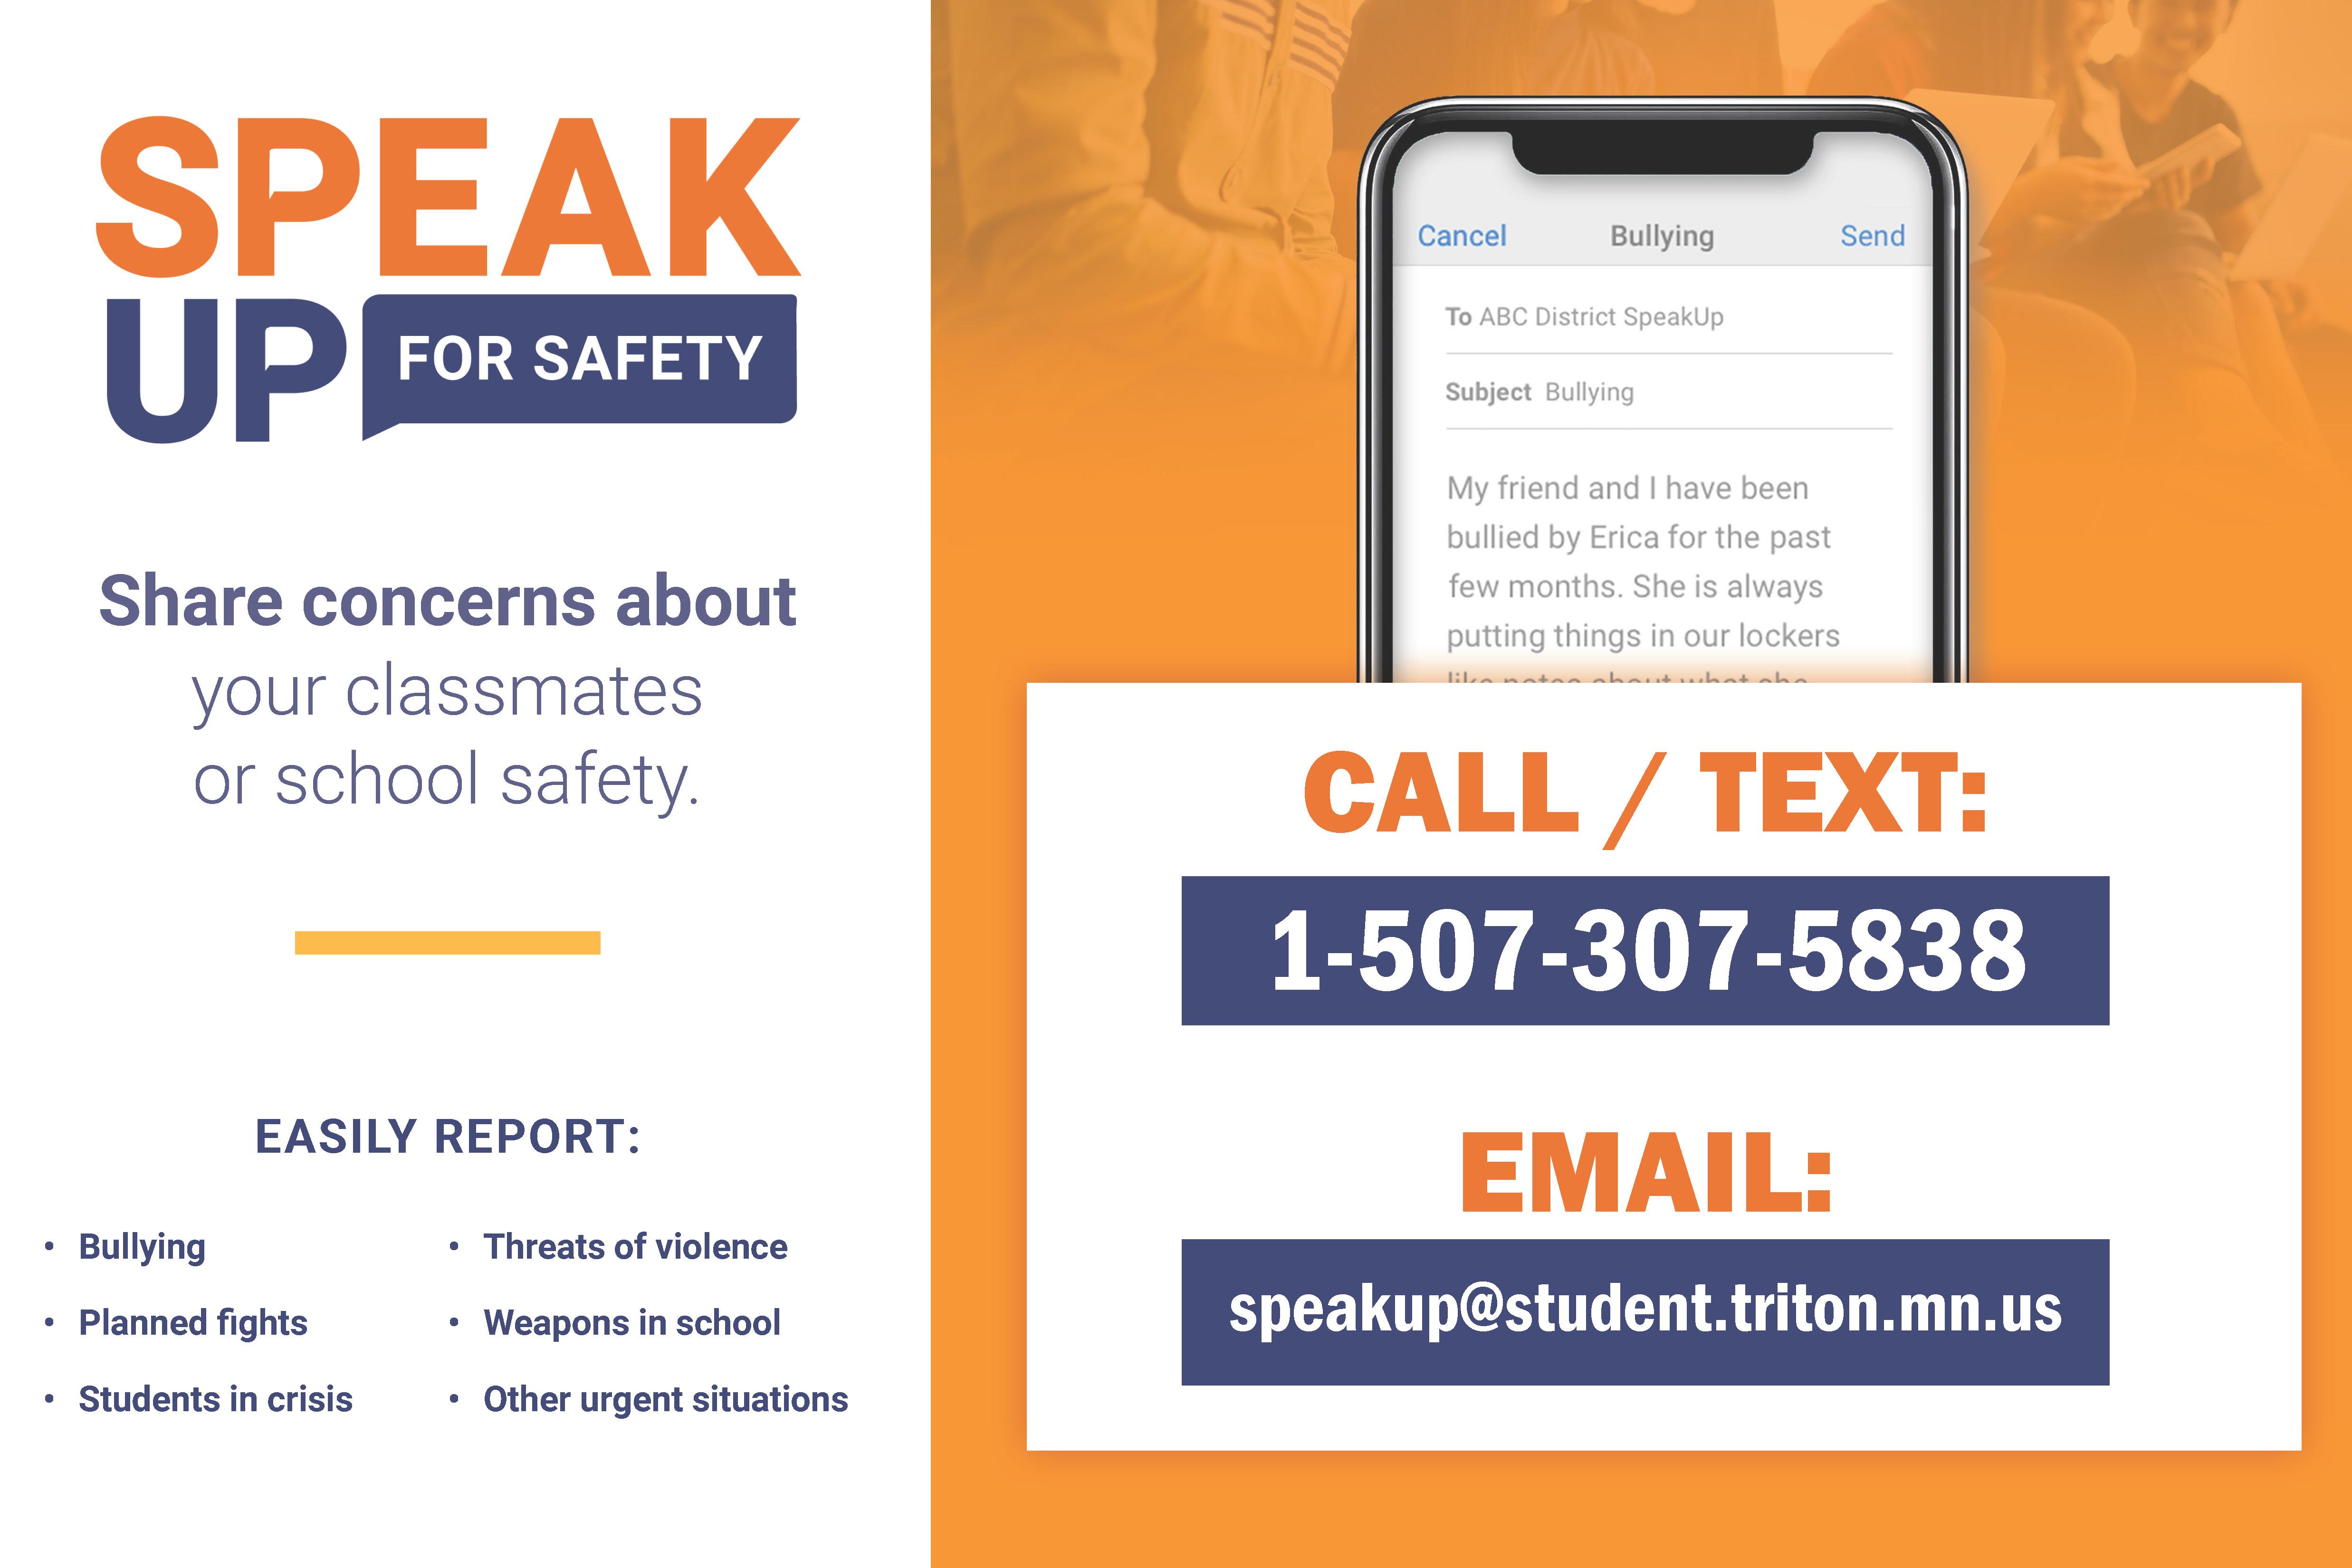 SpeakUp for Safety